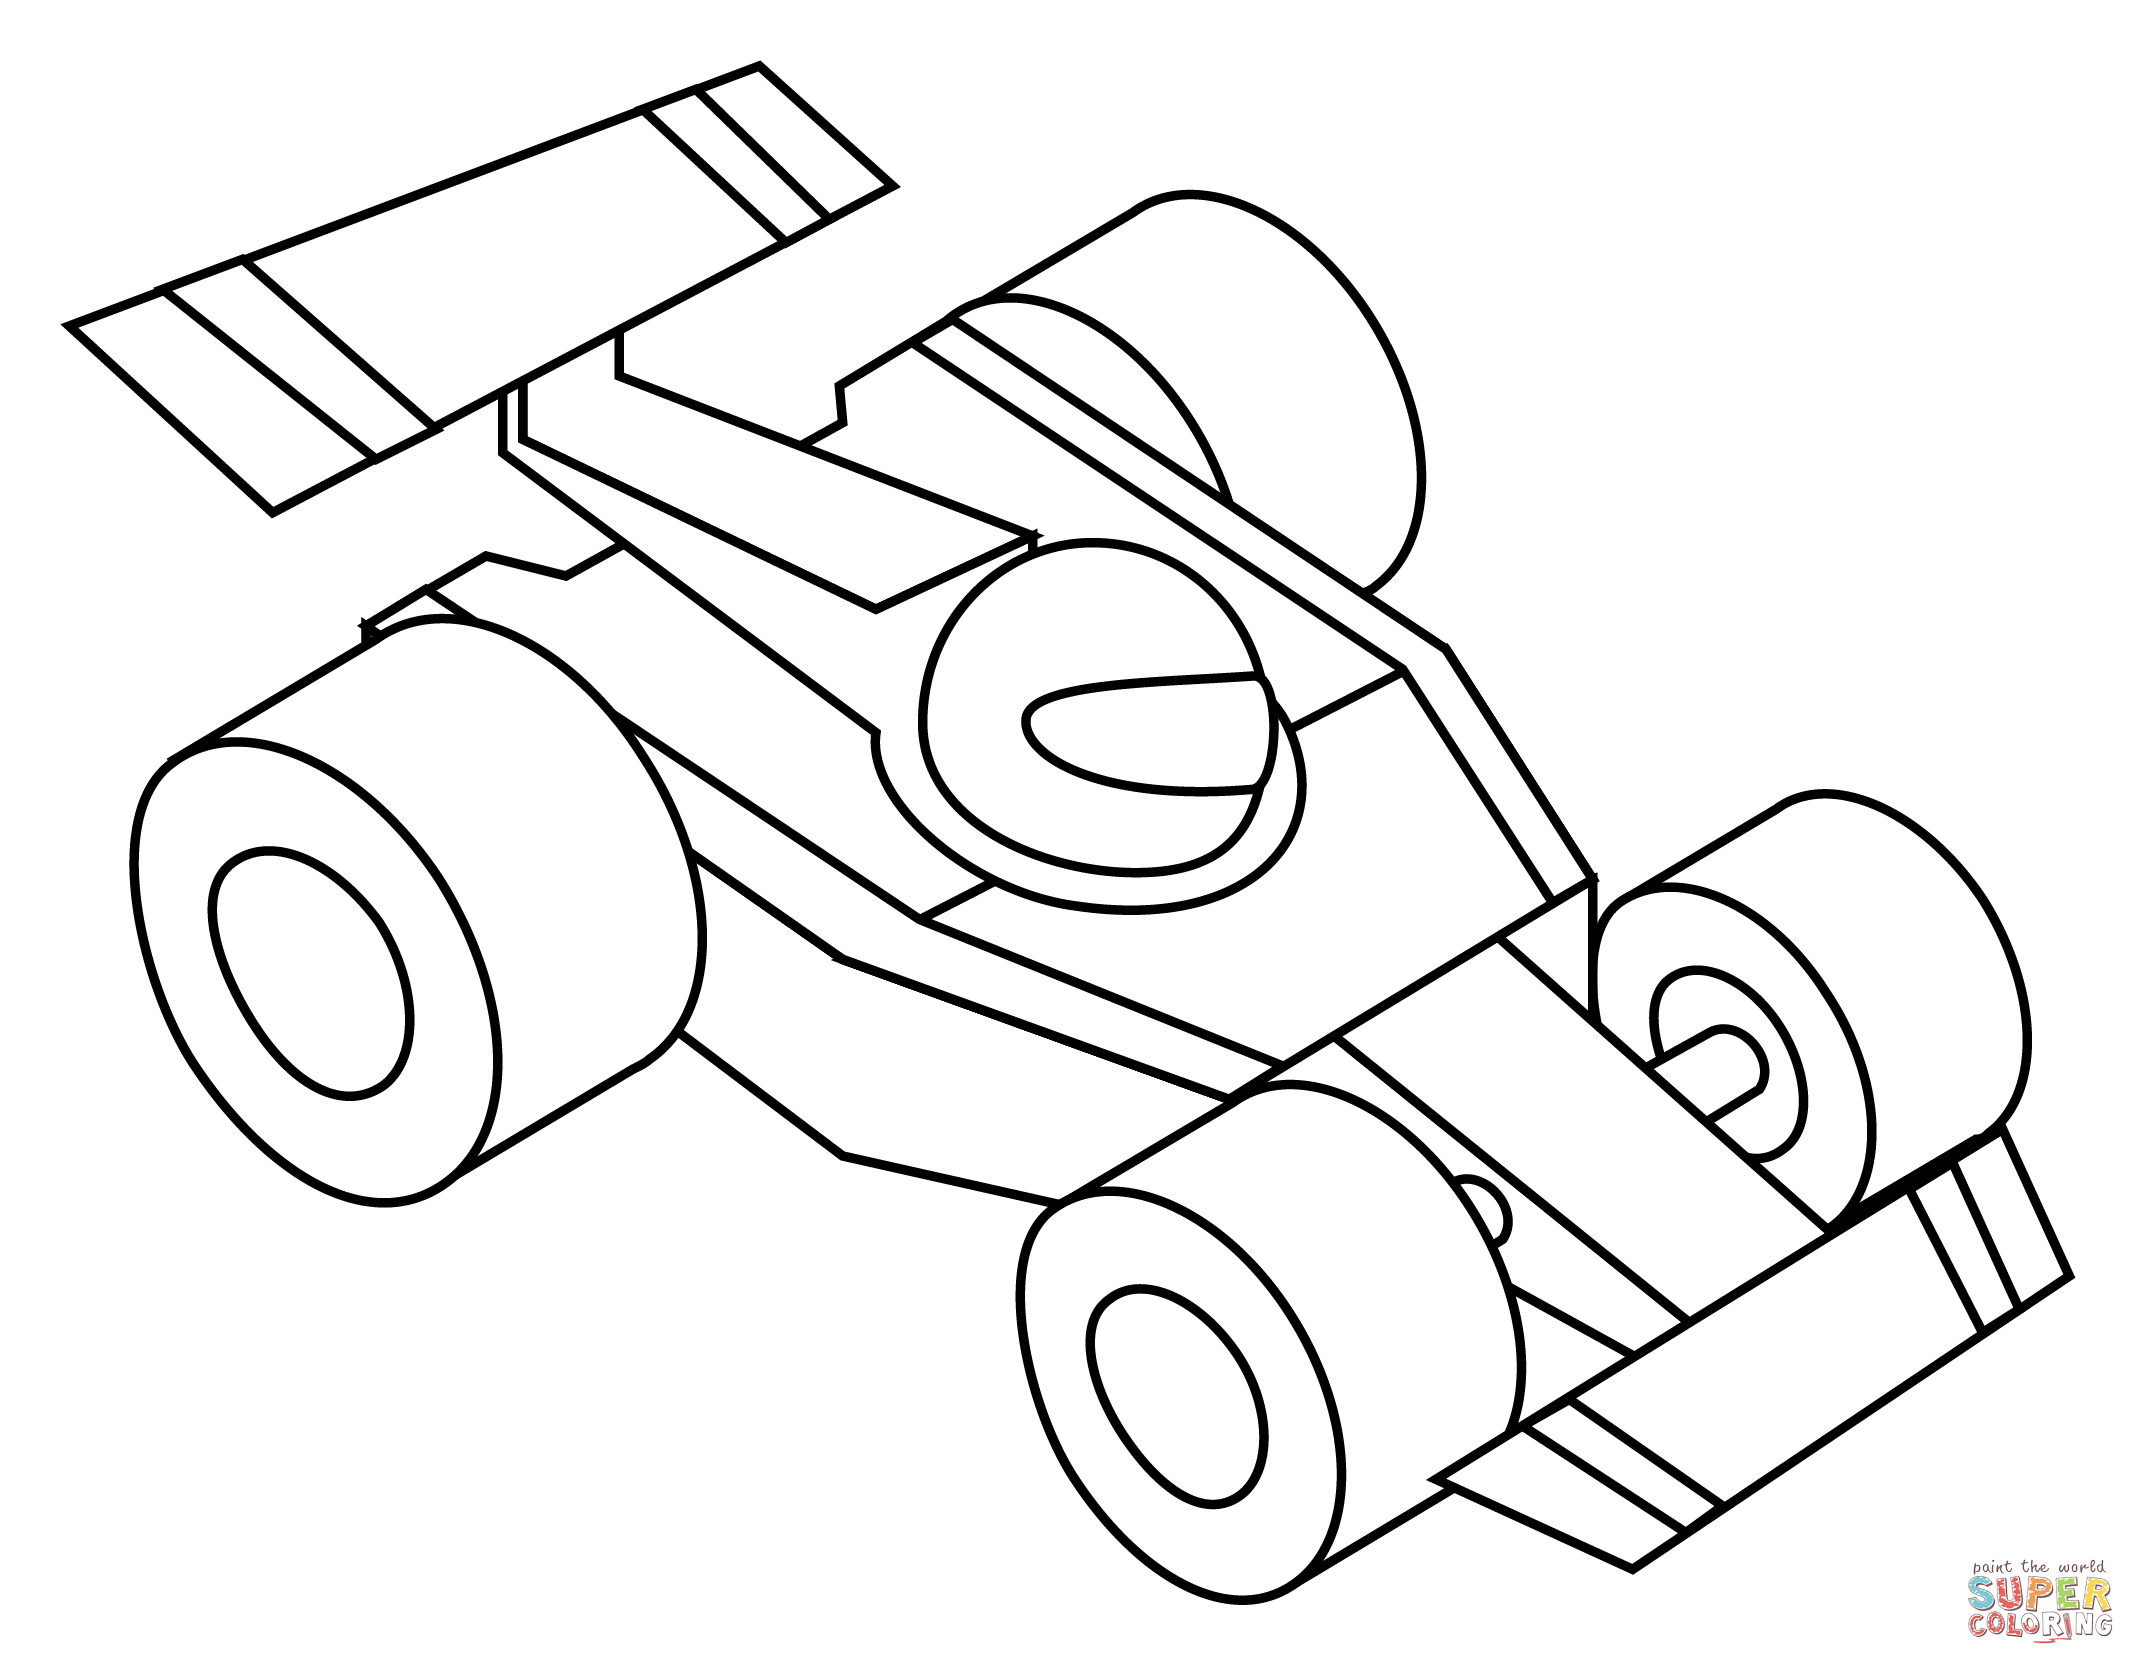 Racing Car coloring page | Free Printable Coloring Pages